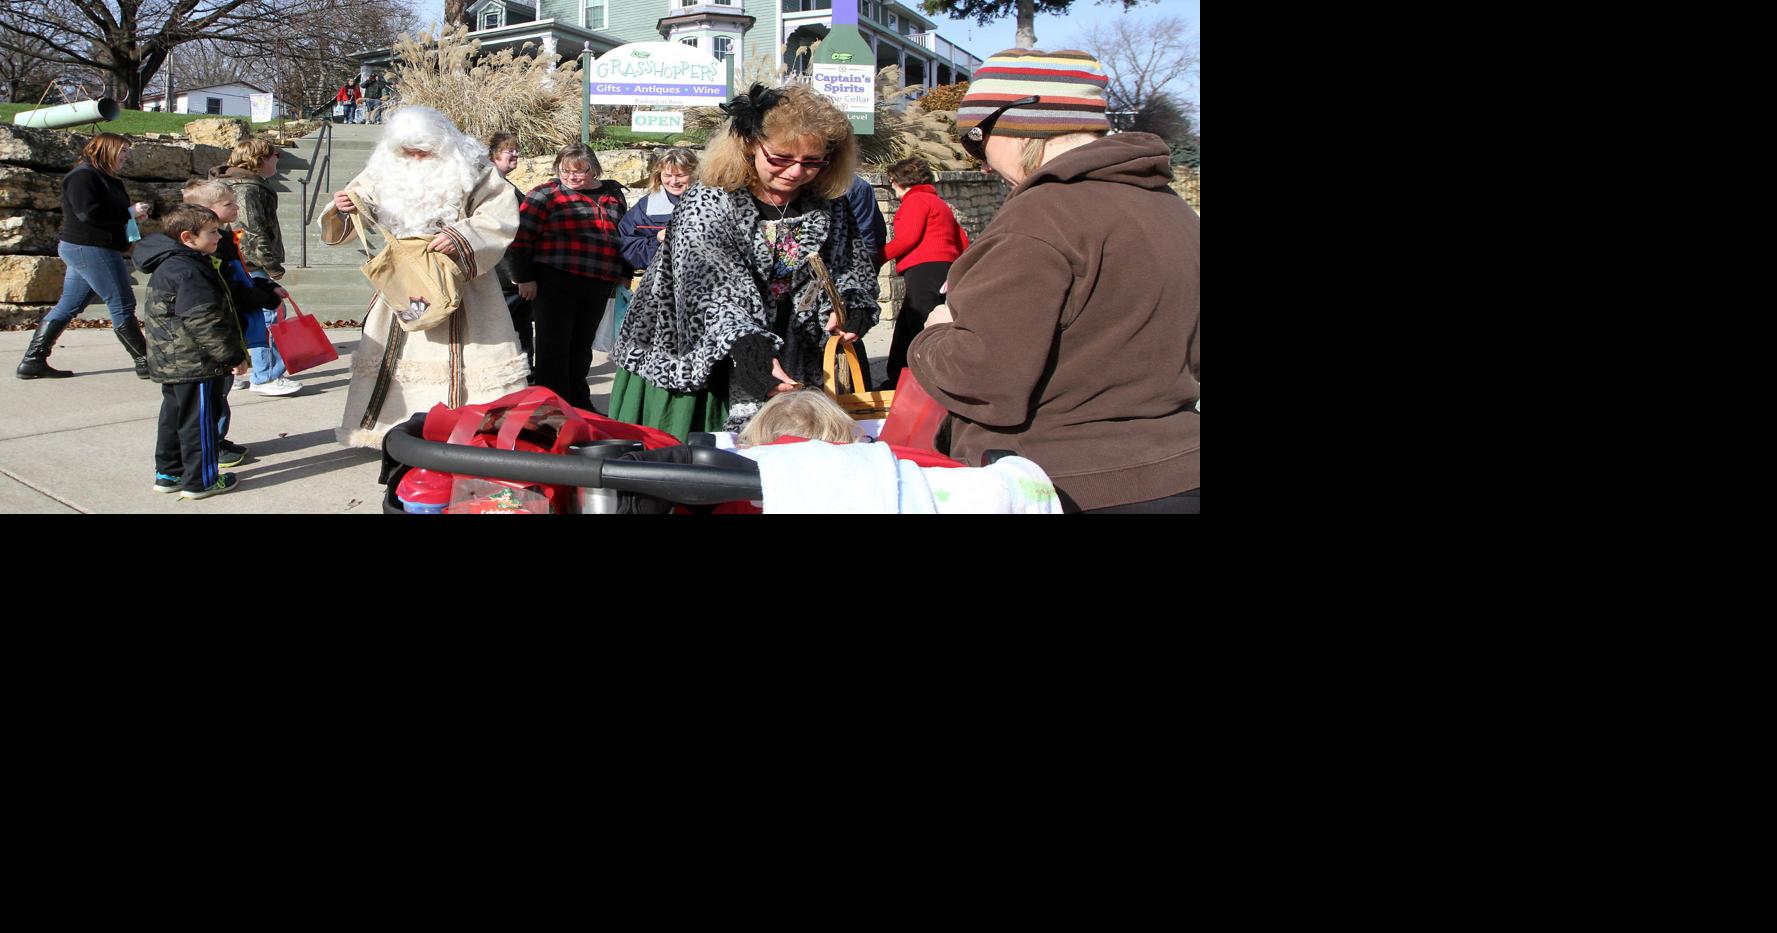 Christmas in Leclaire features shopping, cookie walk, crafts, Santa